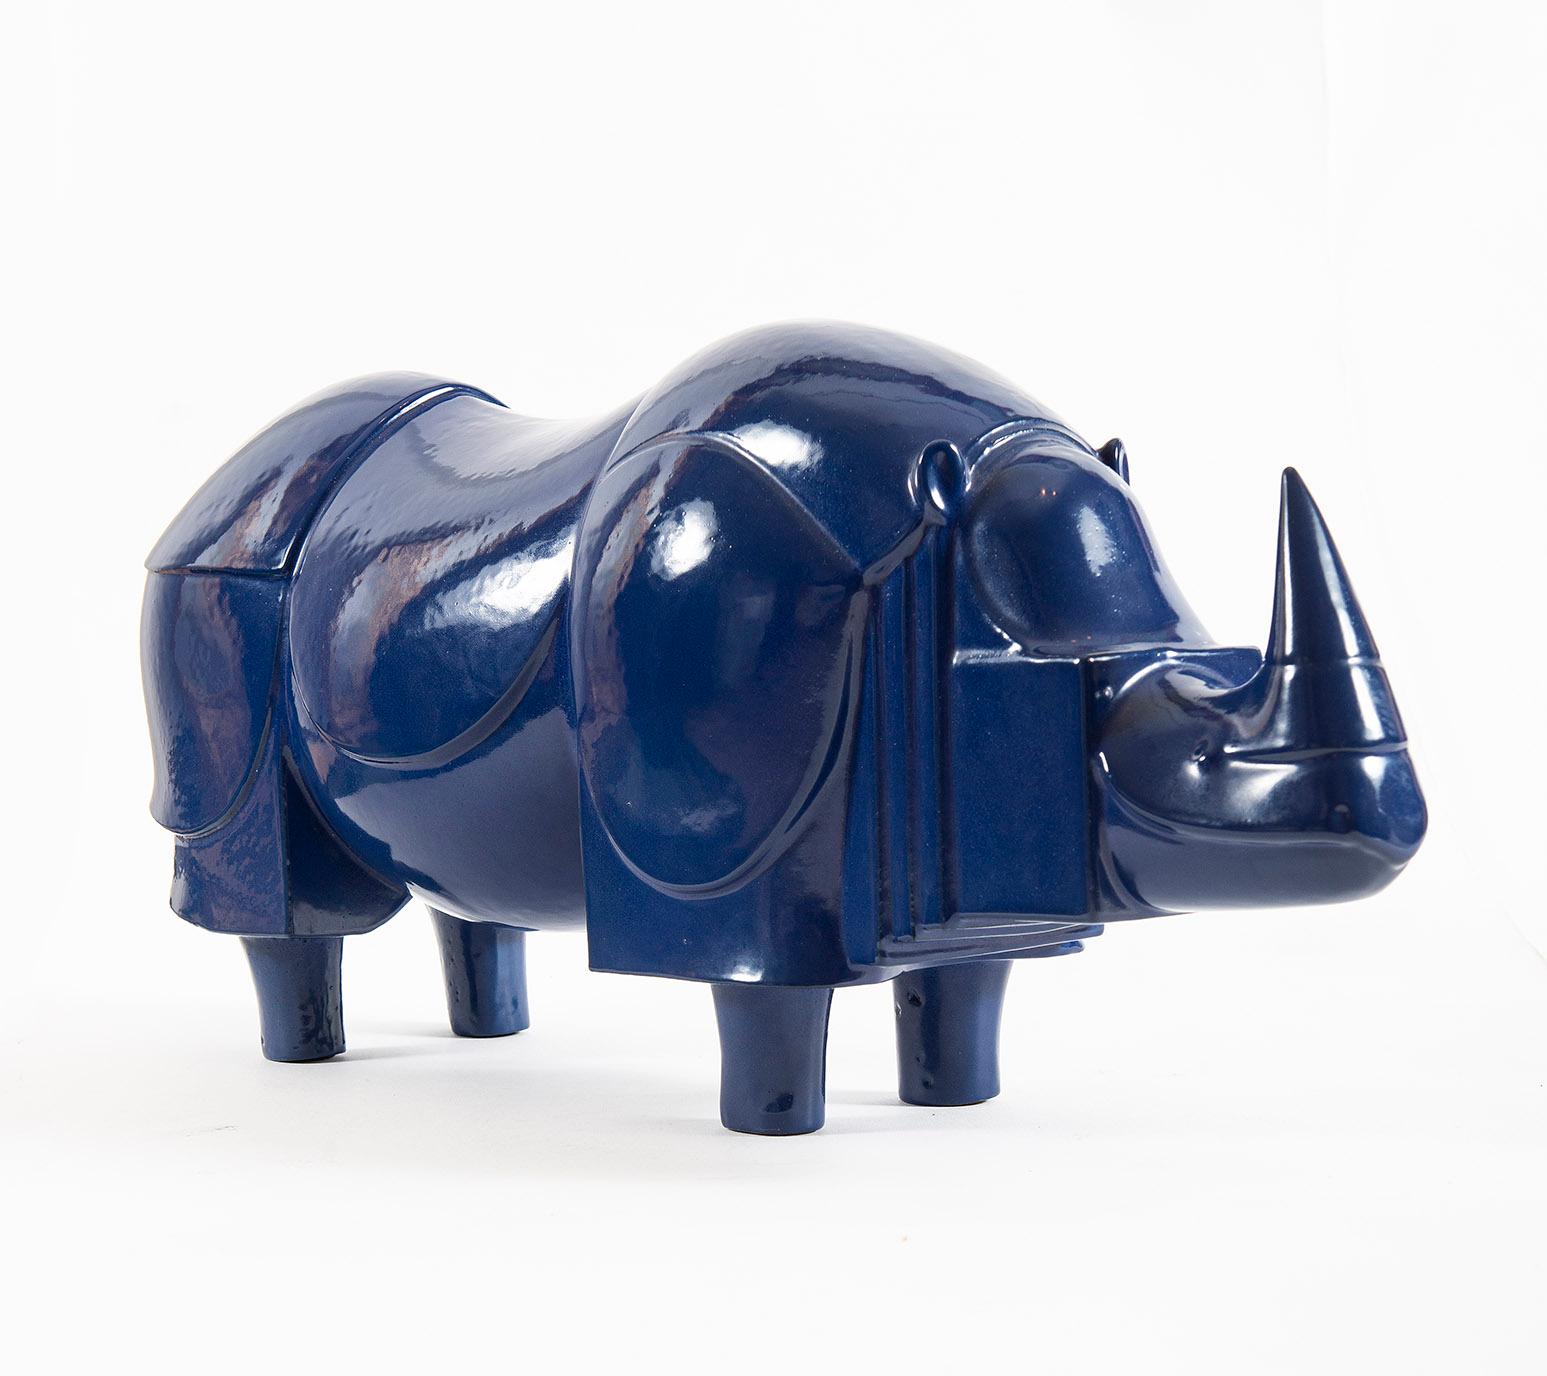 Rhinoceros, Lalanne, Animal, Design, Iron, Limited edition, 1980's, Blue

Ed. 56/150 pcs
1981
Enamelled cast iron
25 x 55 x 15 cm
Signed underside : FXL 81 / Artcurial / 56/150
Certificate of authenticity issued by Artcurial and signed by the